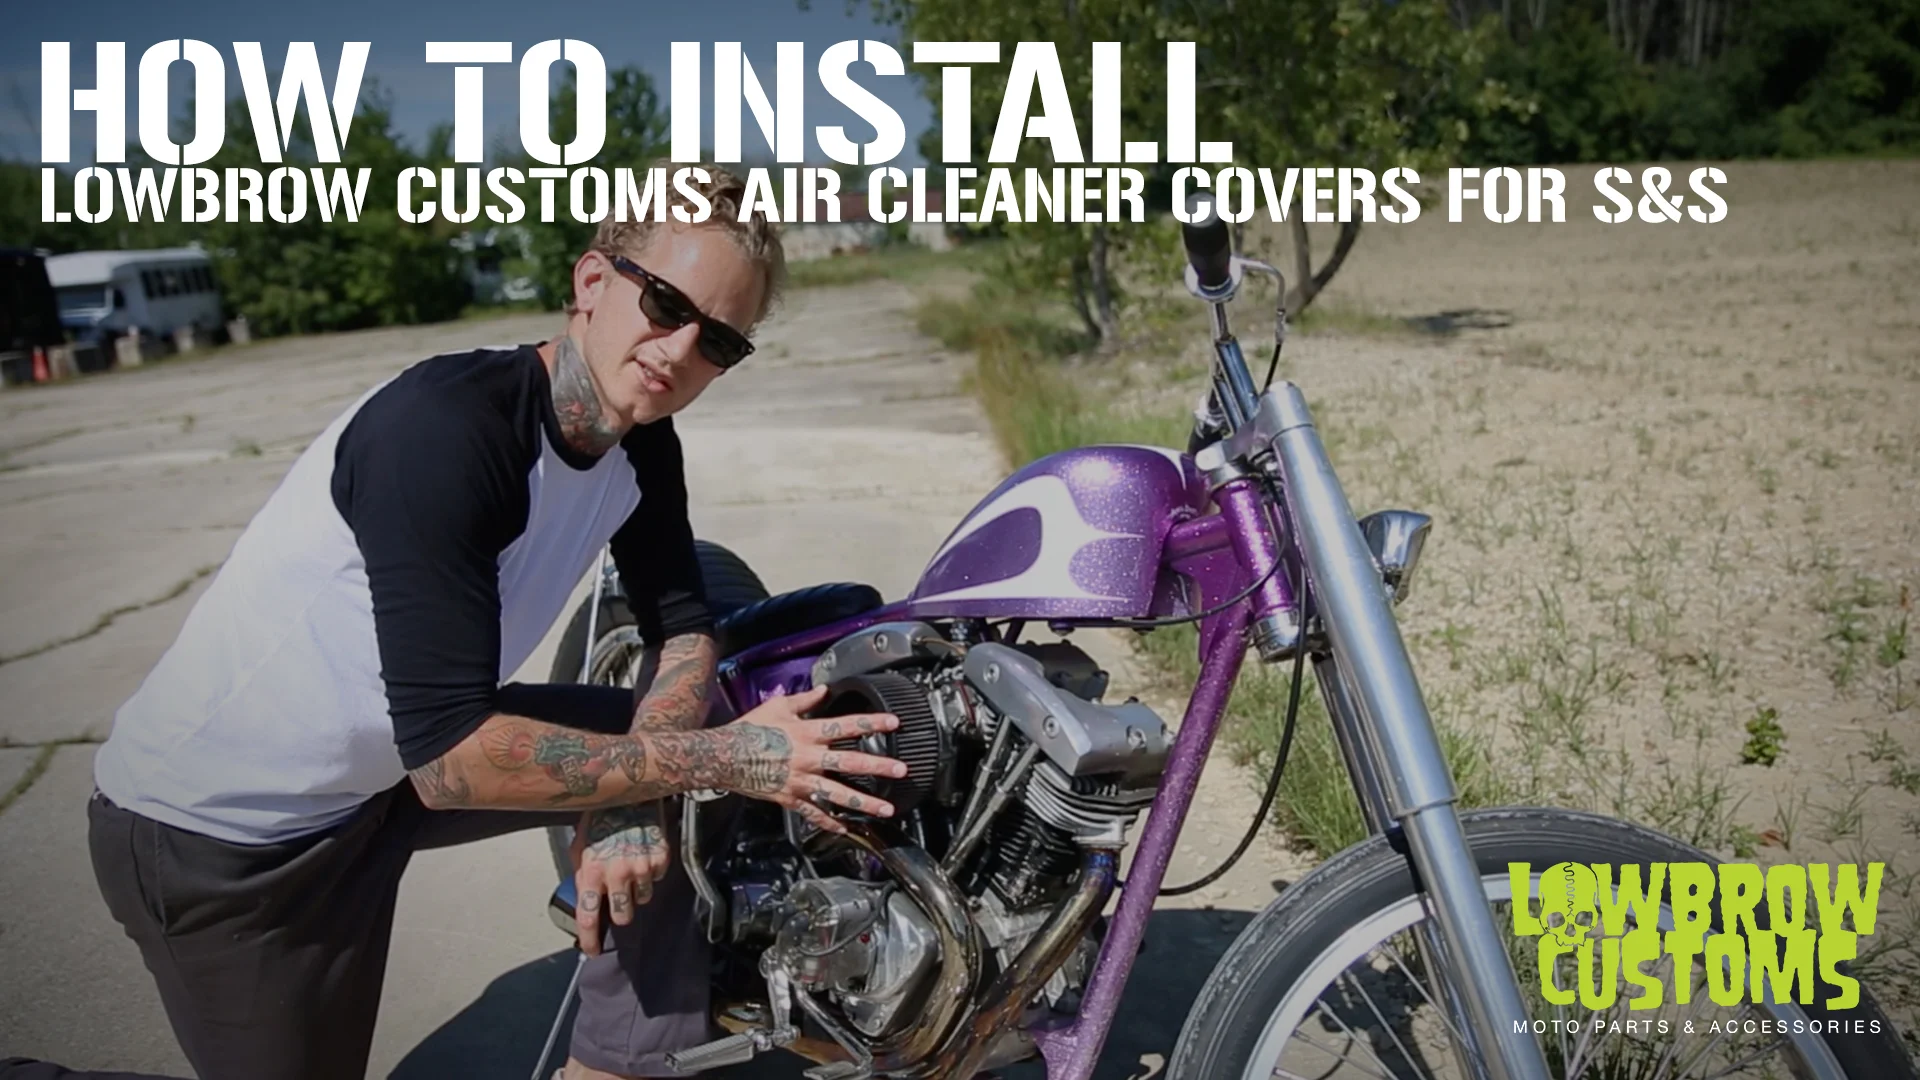 Lowbrow Customs Air Cleaner Cover Overview And Install on Vimeo